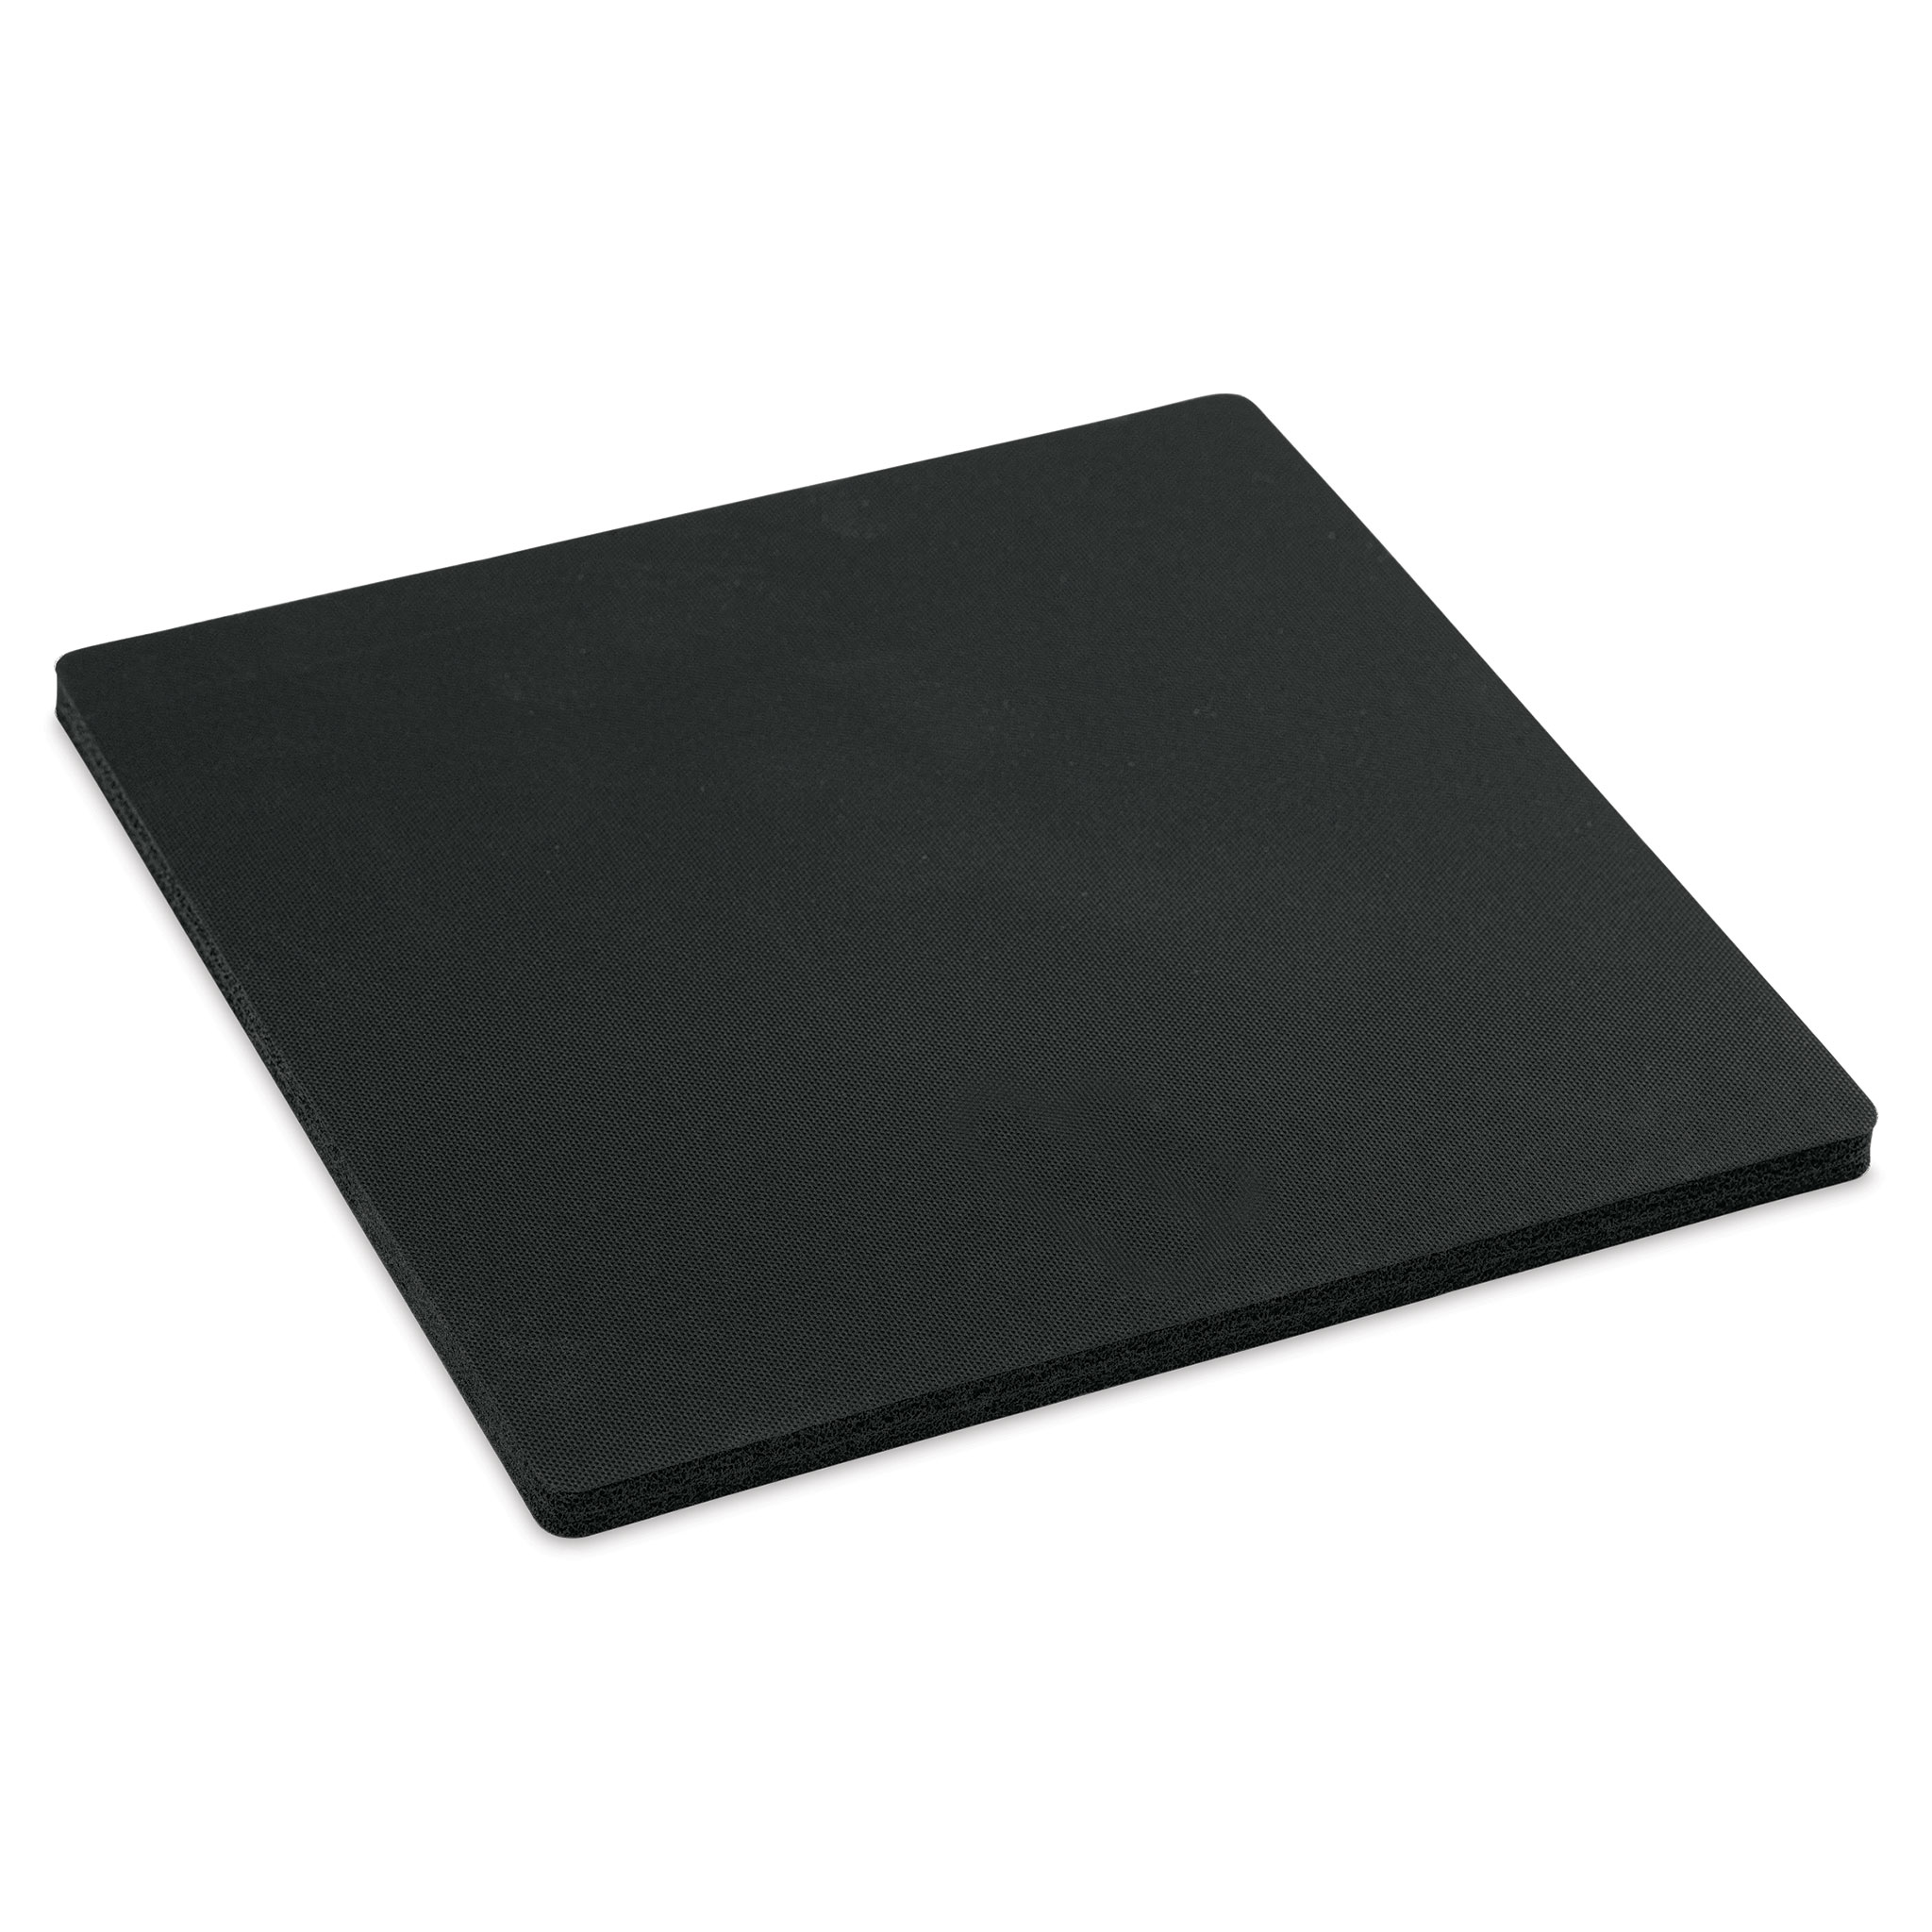 Large Silicone Heat Resistant Mat - Inspire Uplift